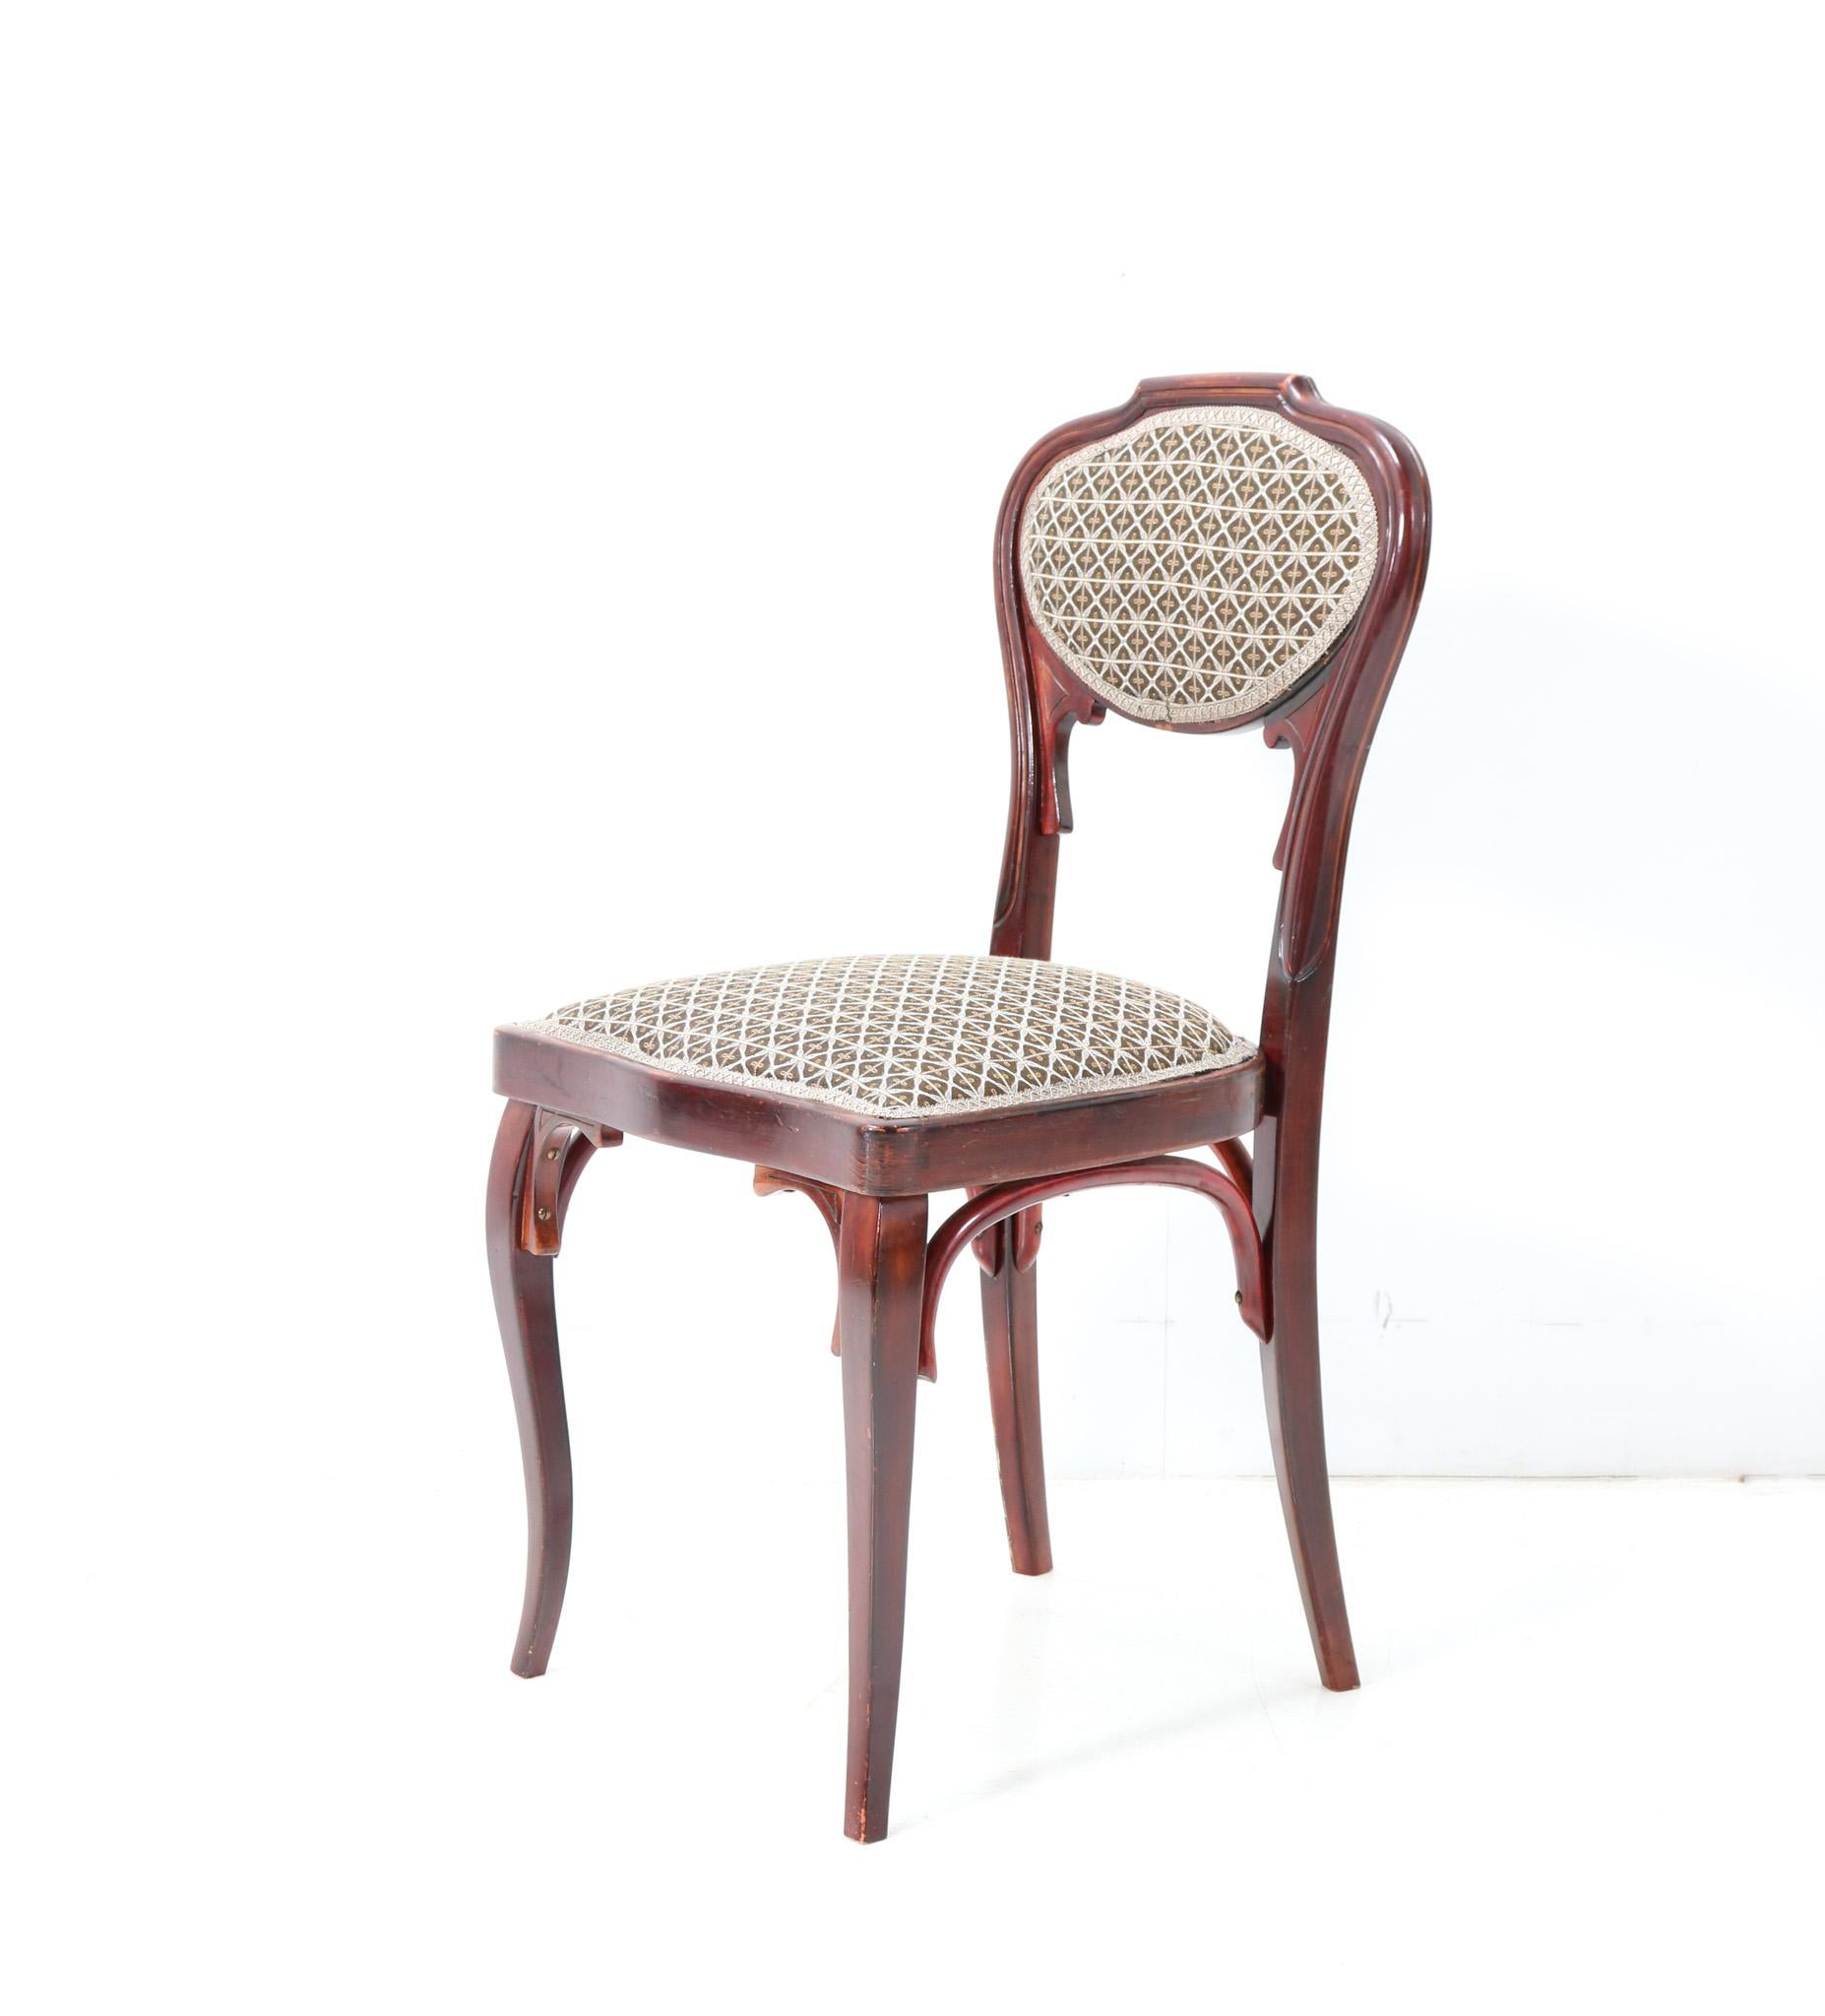 Fabric Four Vienna Secession Side Chairs by Jacob and Josef Kohn, 1900s For Sale